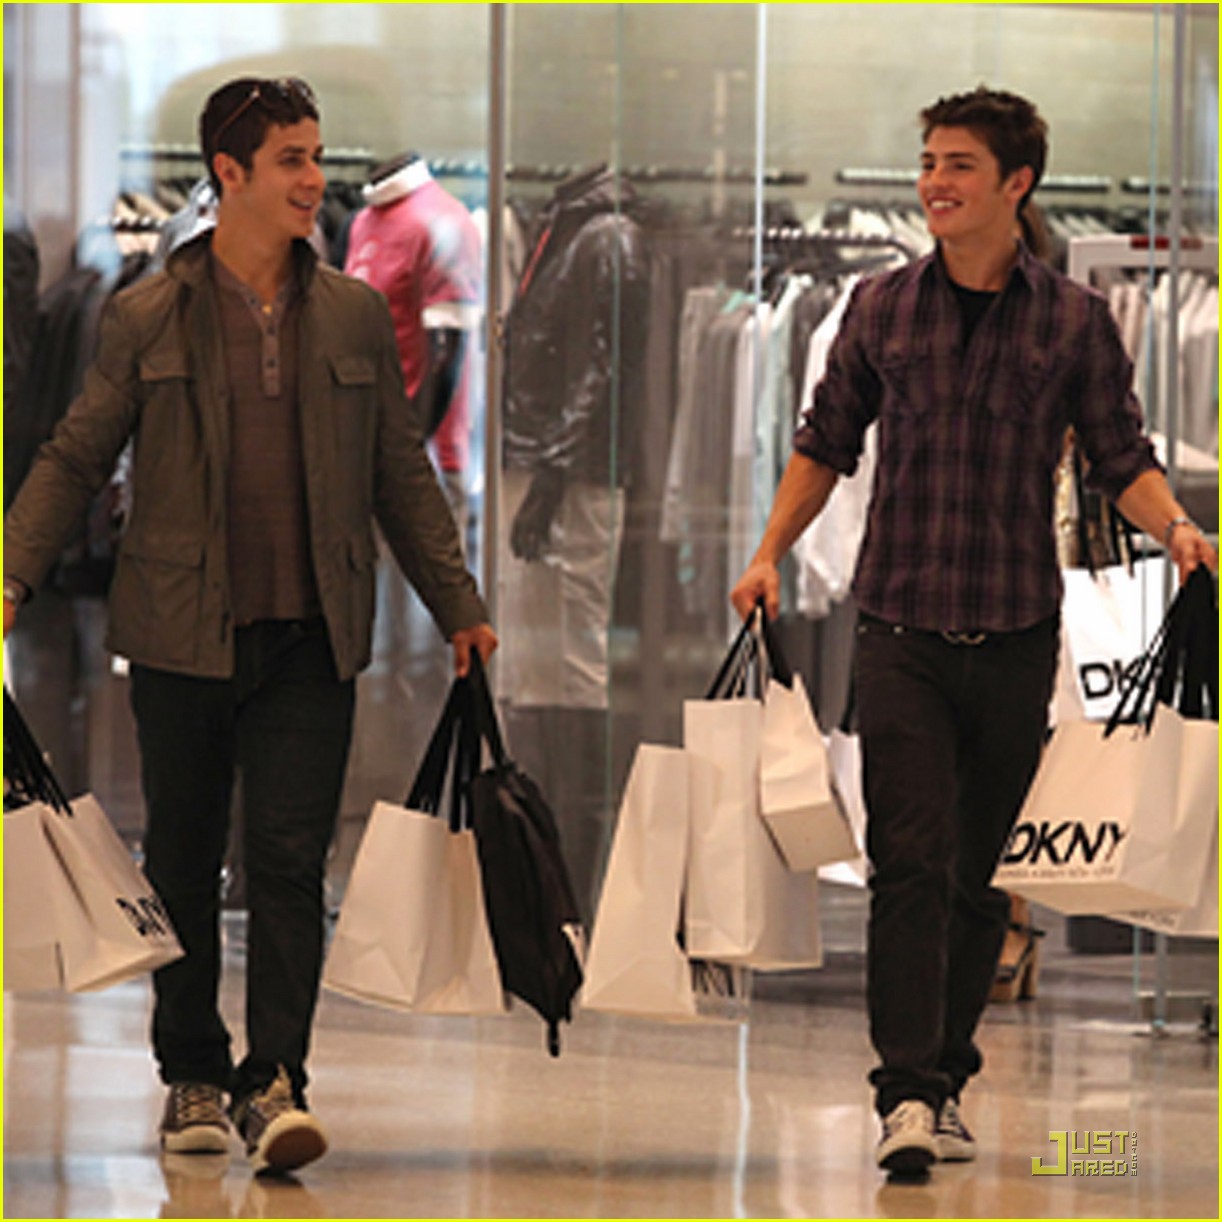 Gregg Sulkin And David Henrie Dkny Duo Photo 426410 Photo Gallery Just Jared Jr